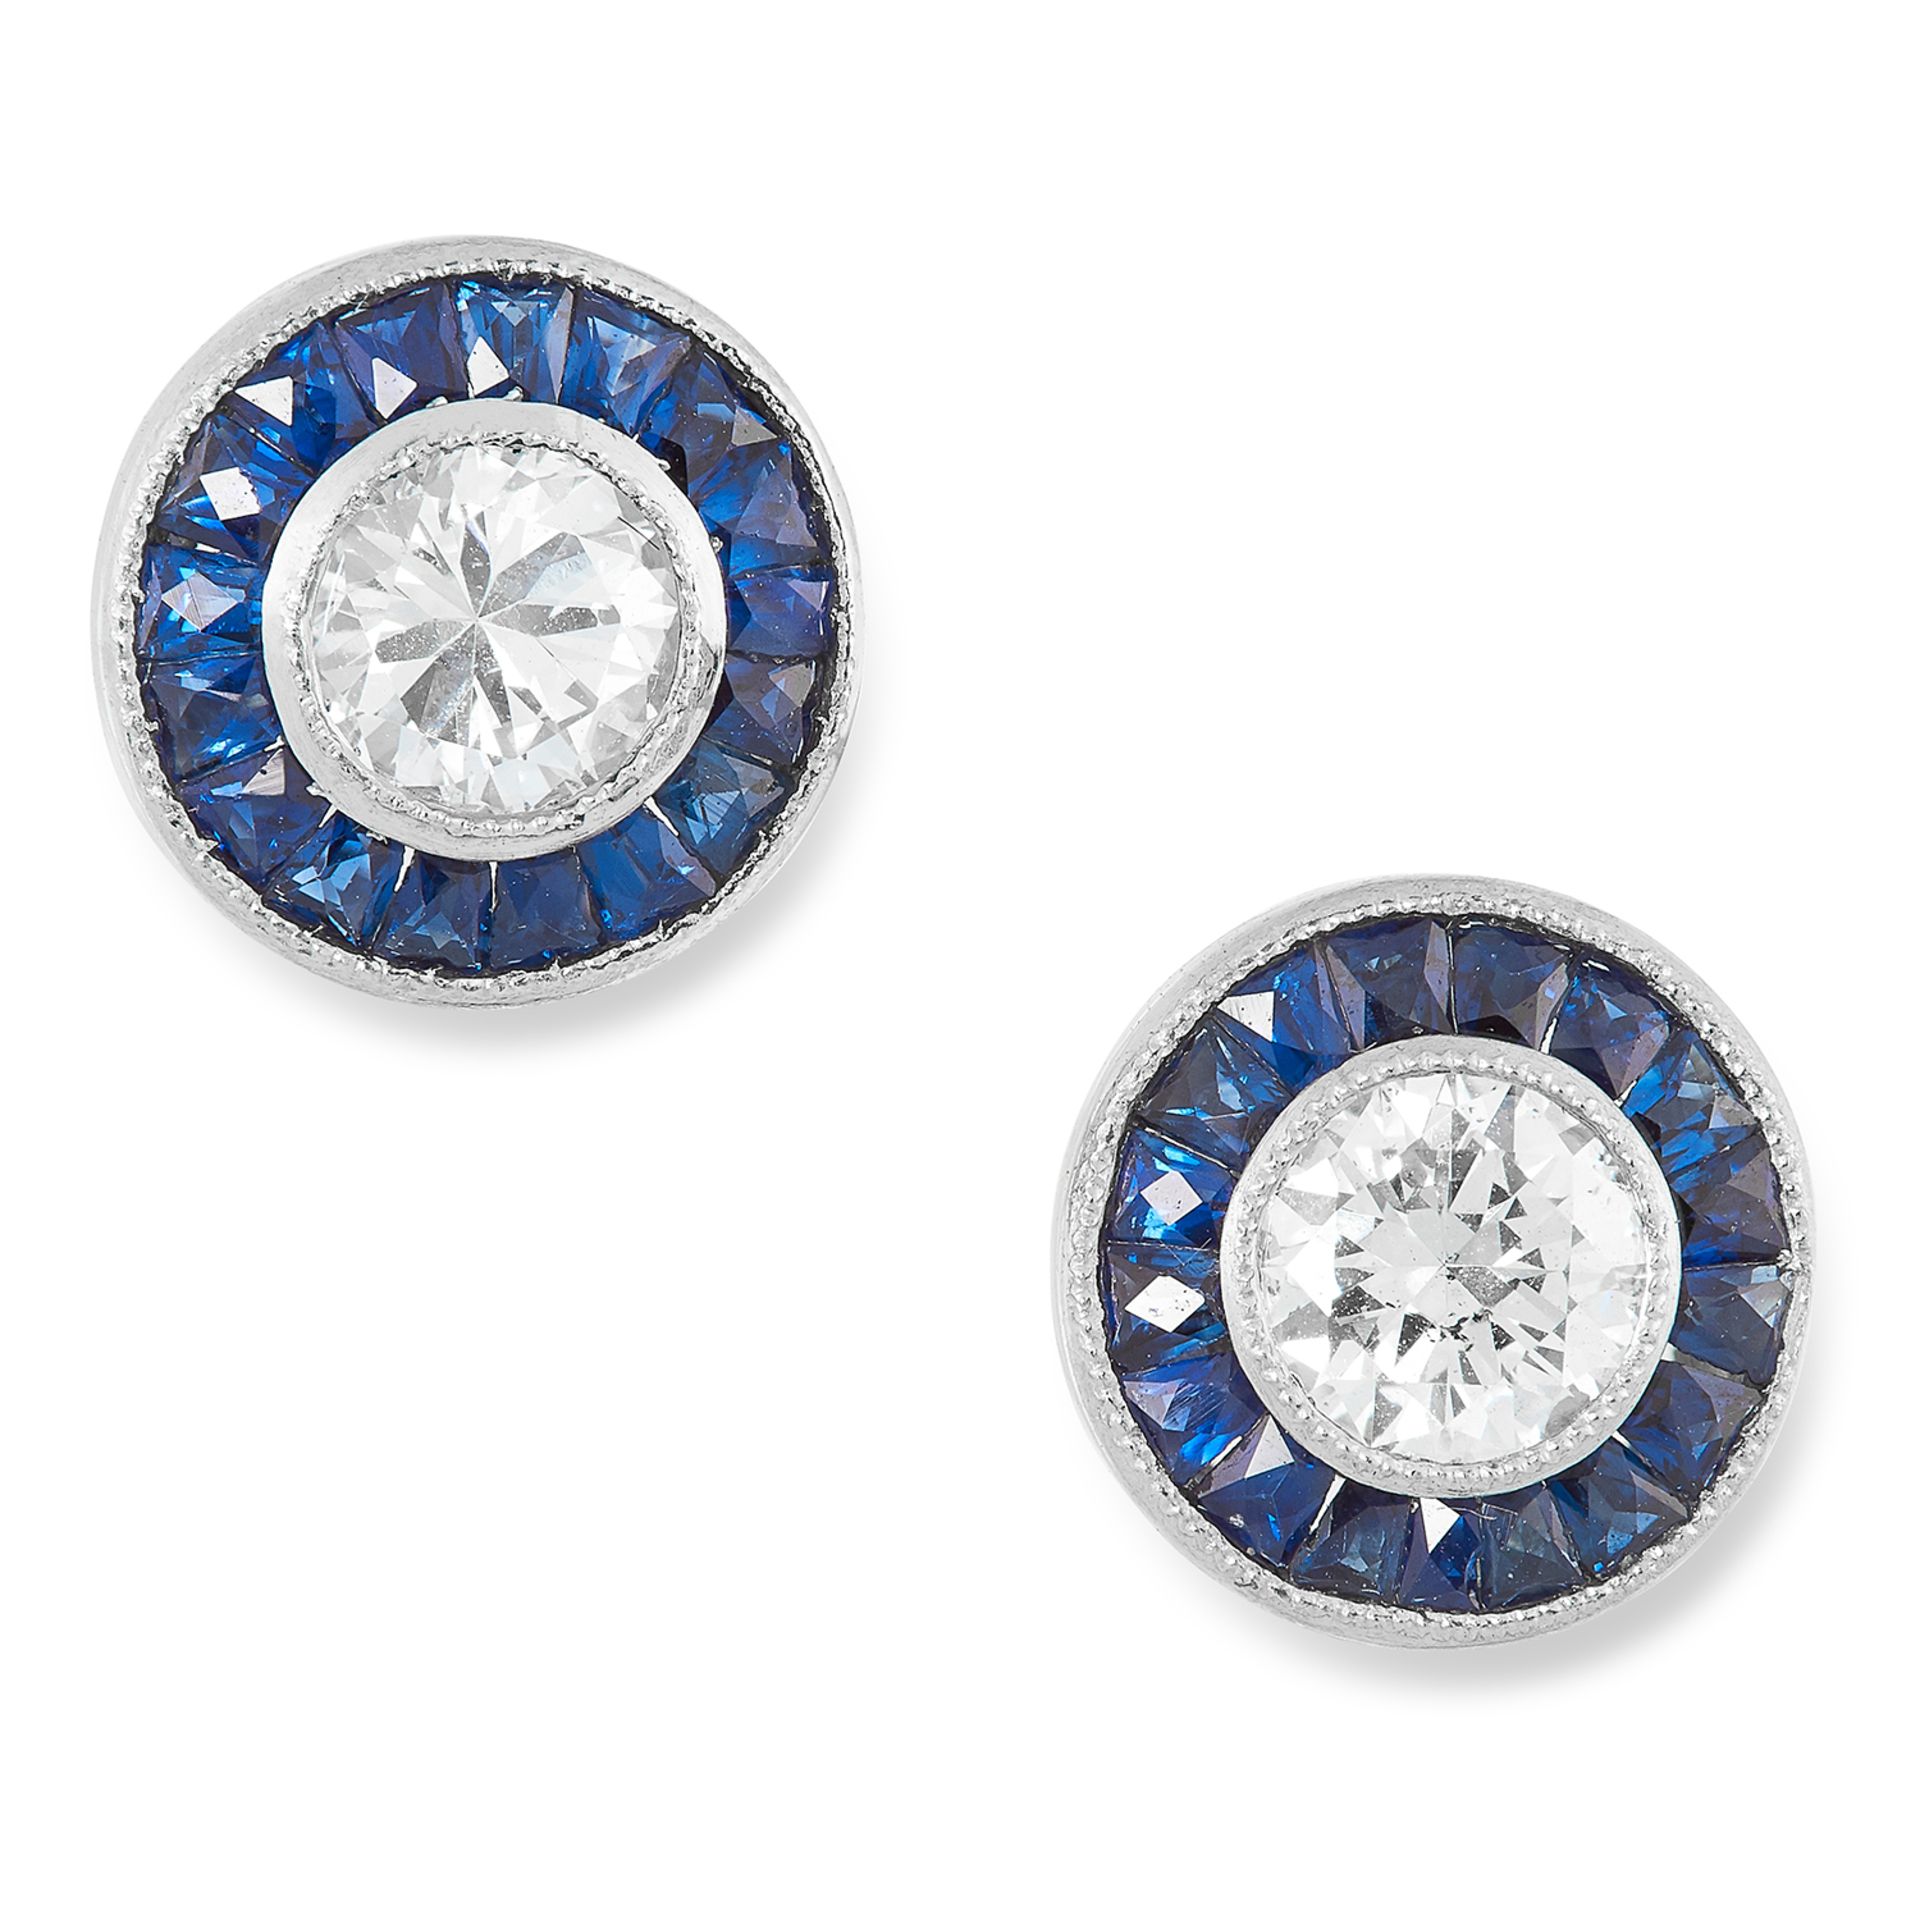 A PAIR OF DIAMOND AND SAPPHIRE TARGET EARRINGS each set with a round cut diamonds and step cut